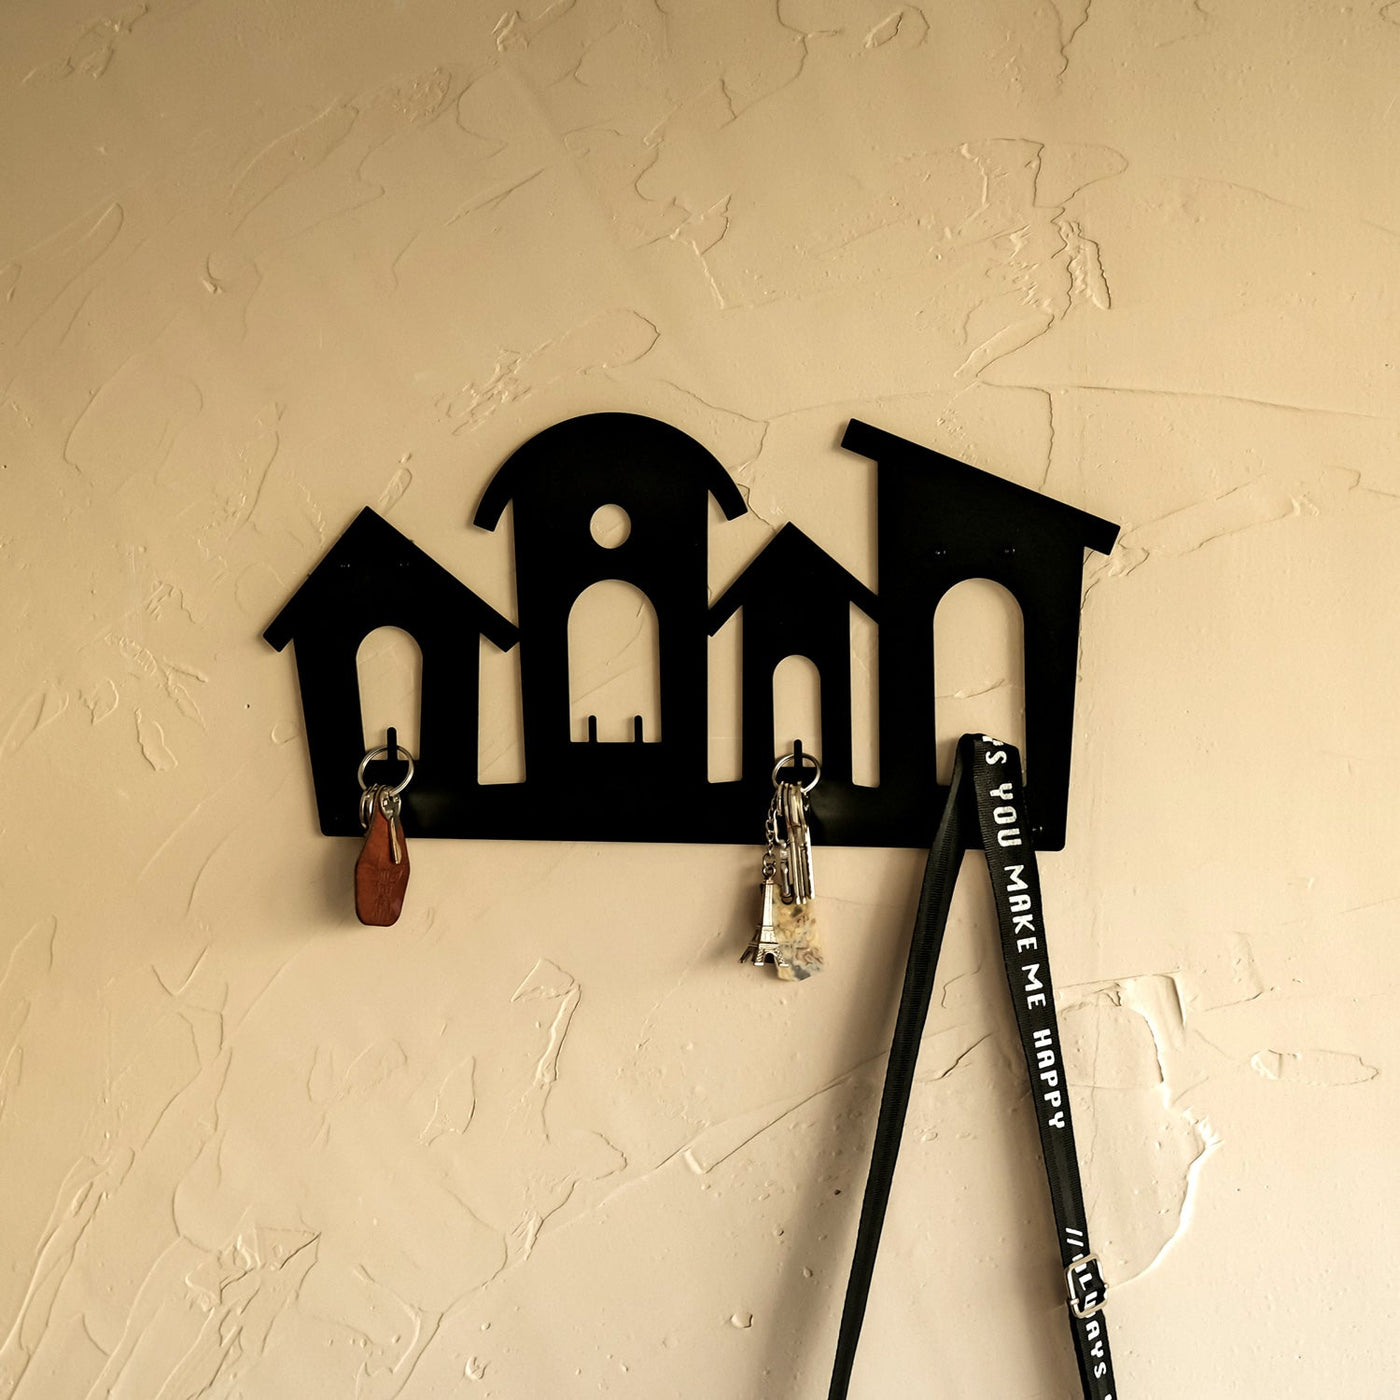 Doghouse Metal Wall Hanger